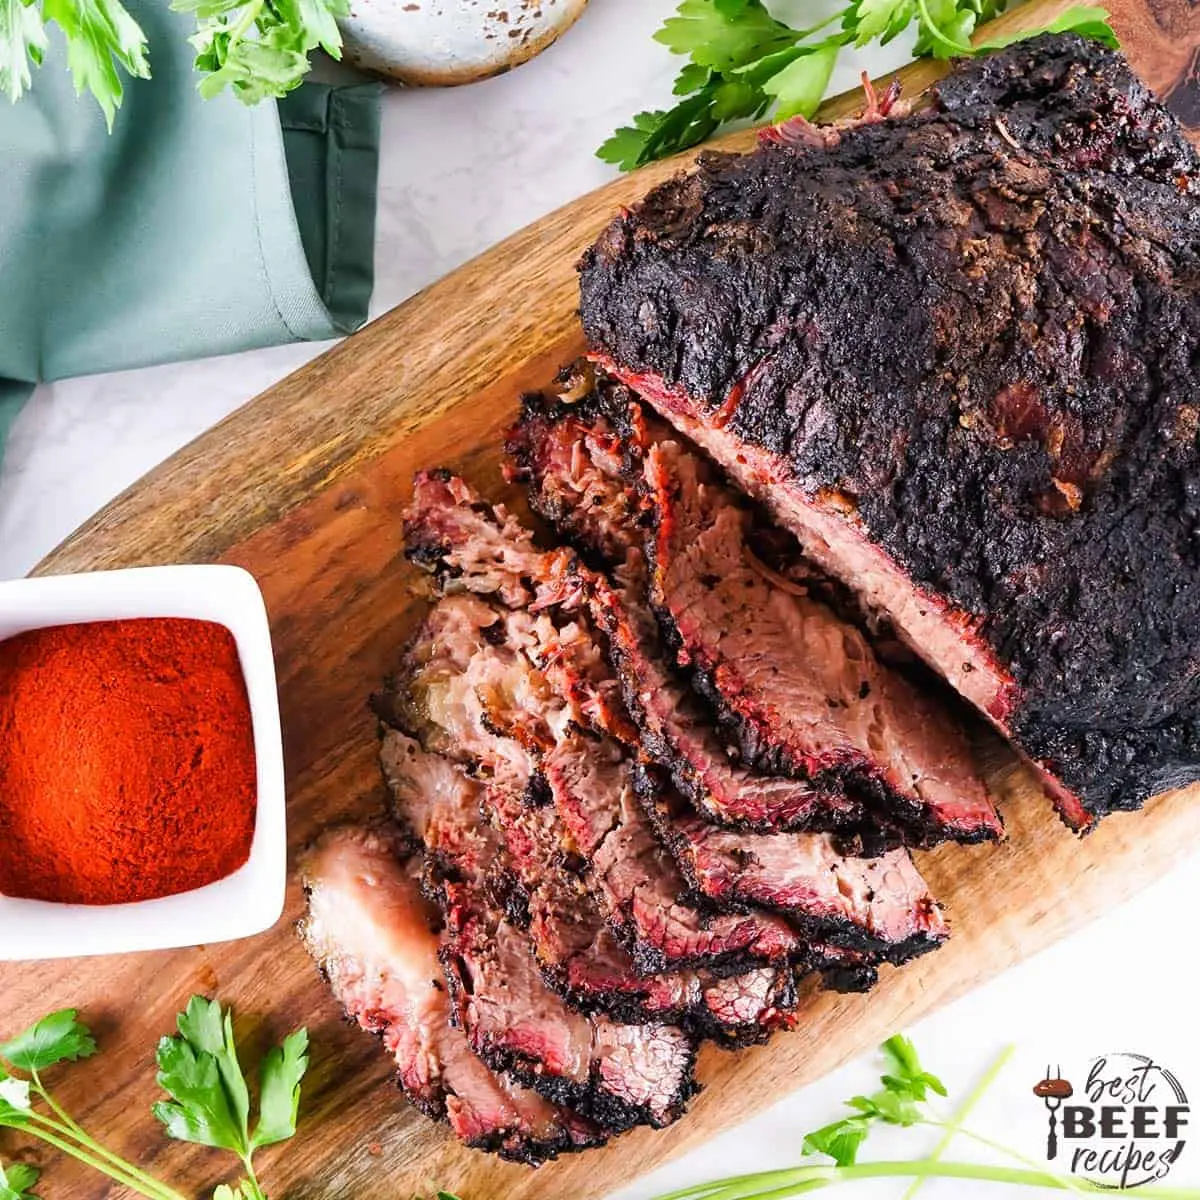 best seasoning for smoked brisket - What is the best Flavour to smoke brisket